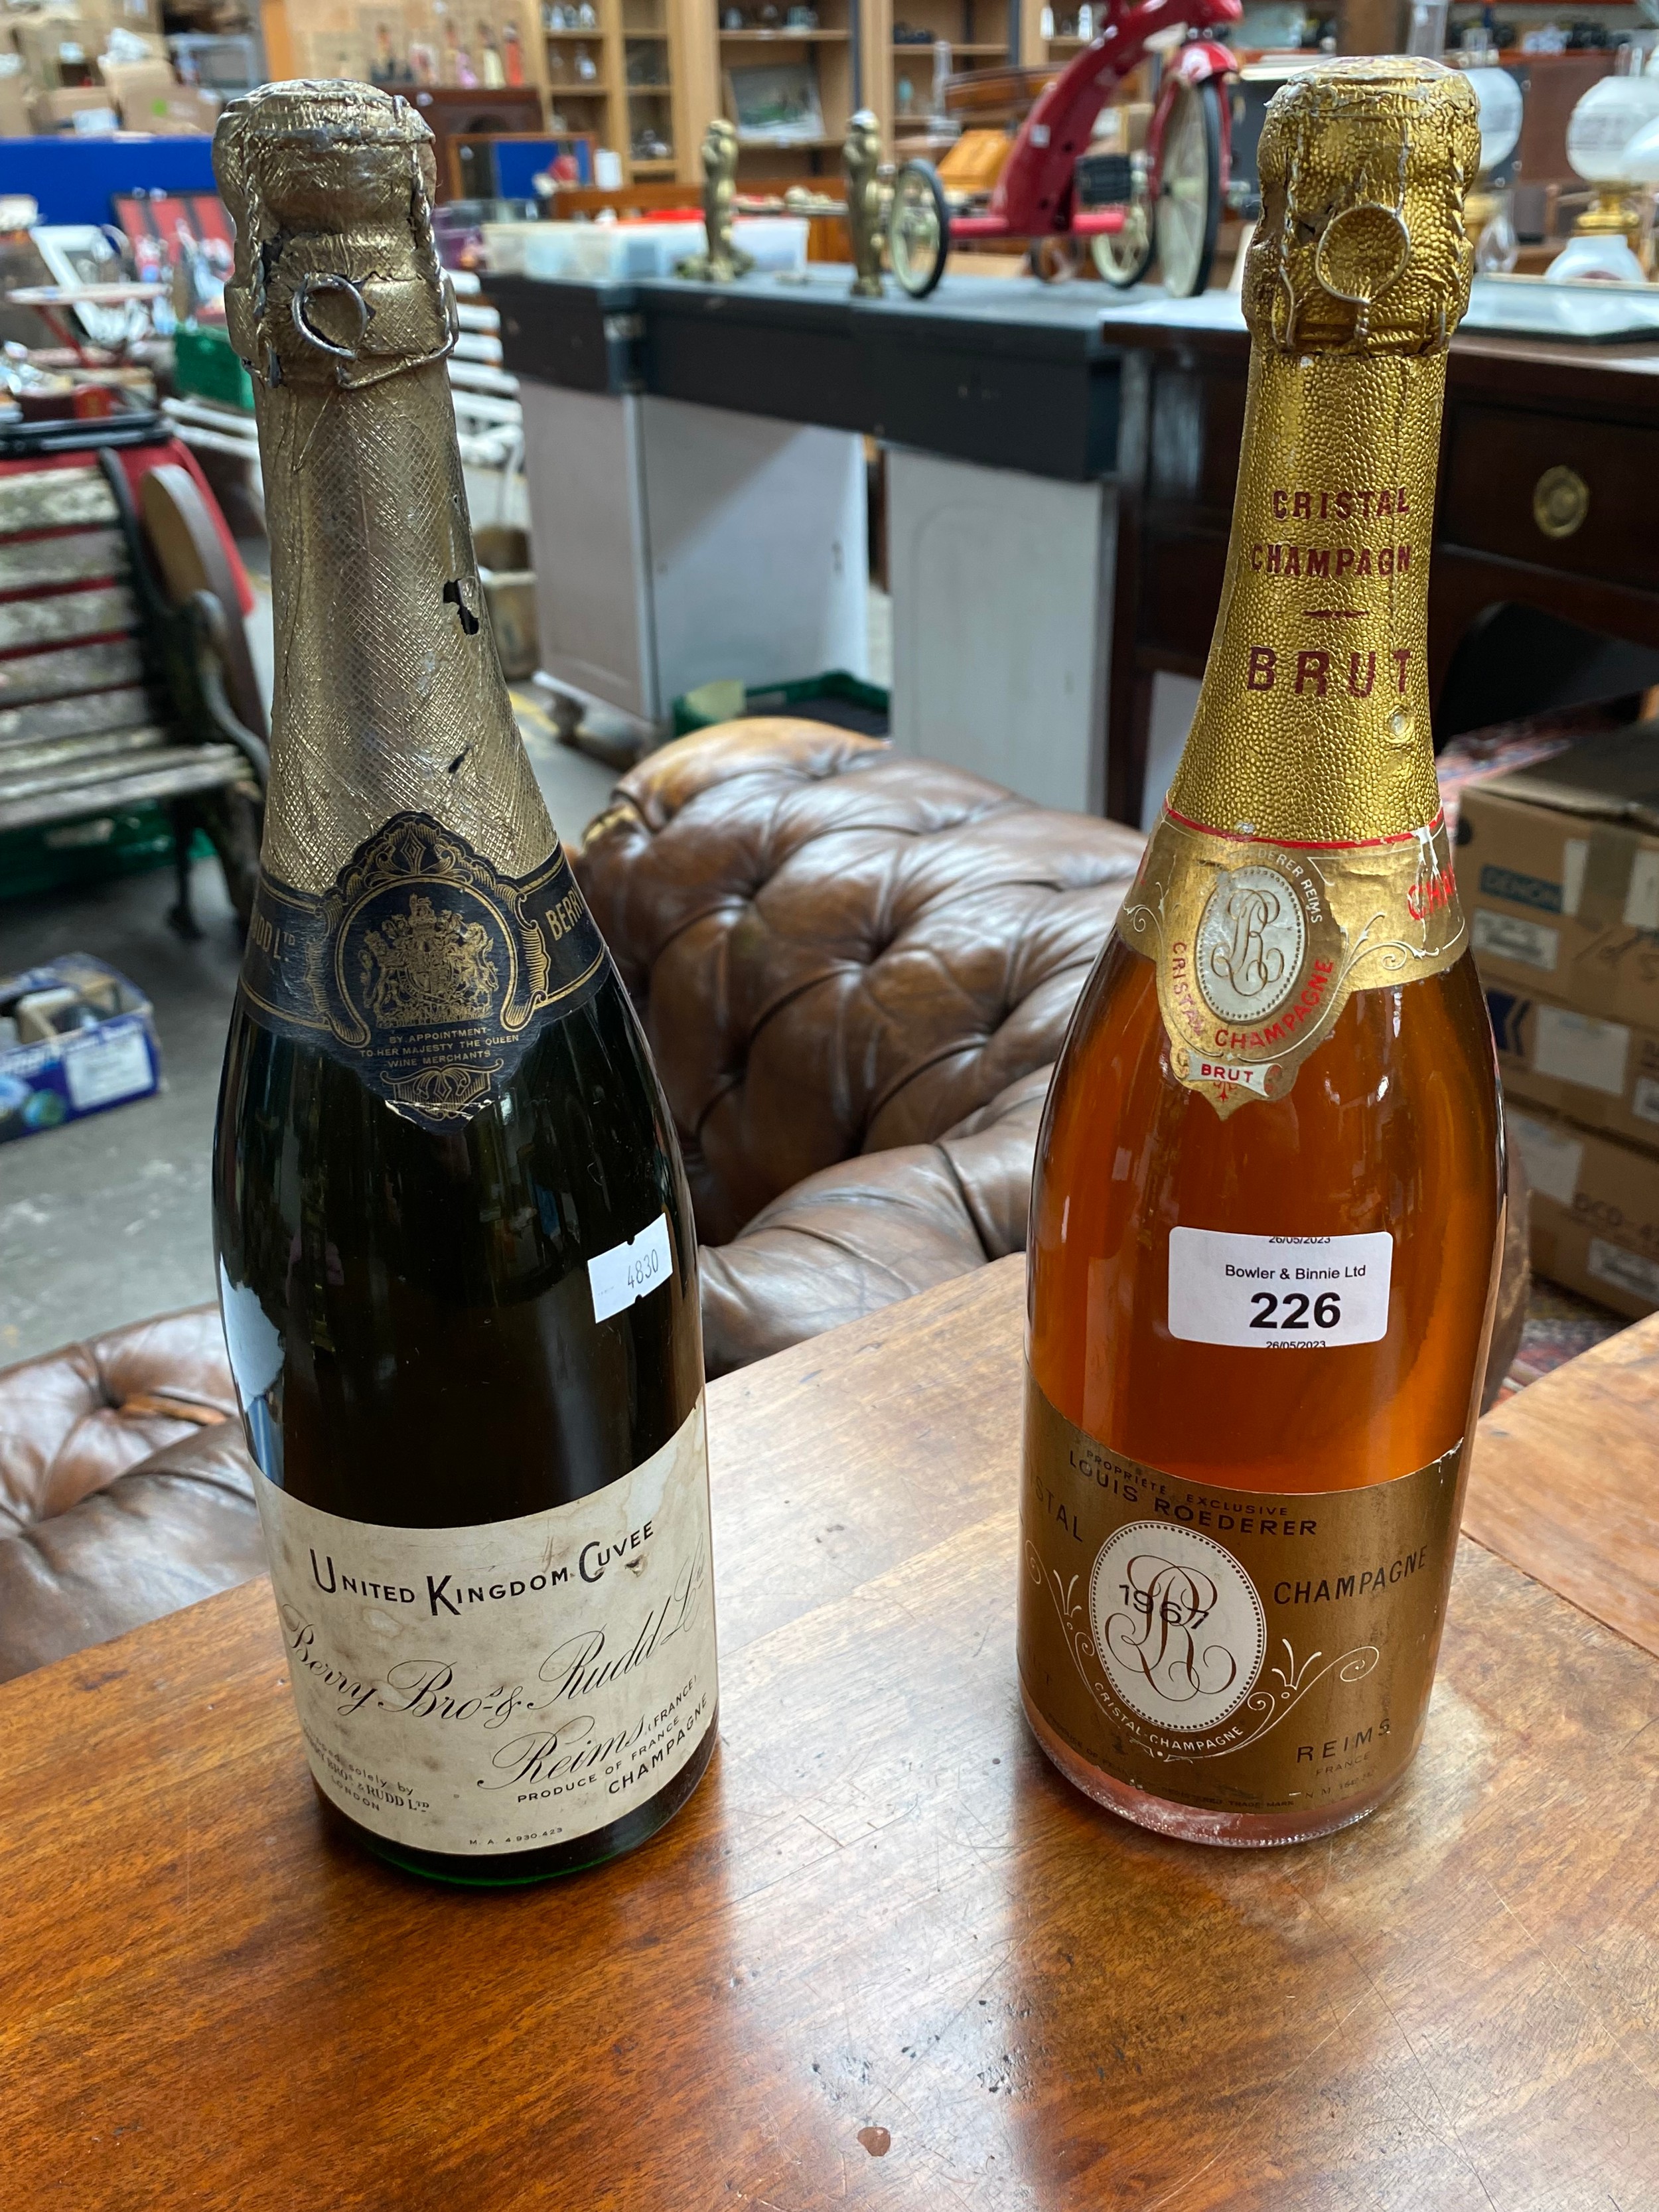 A Bottle of 1967 Louis Roederer Cristal Champagne along with A Bottle of berry Bro & rudd ltd French